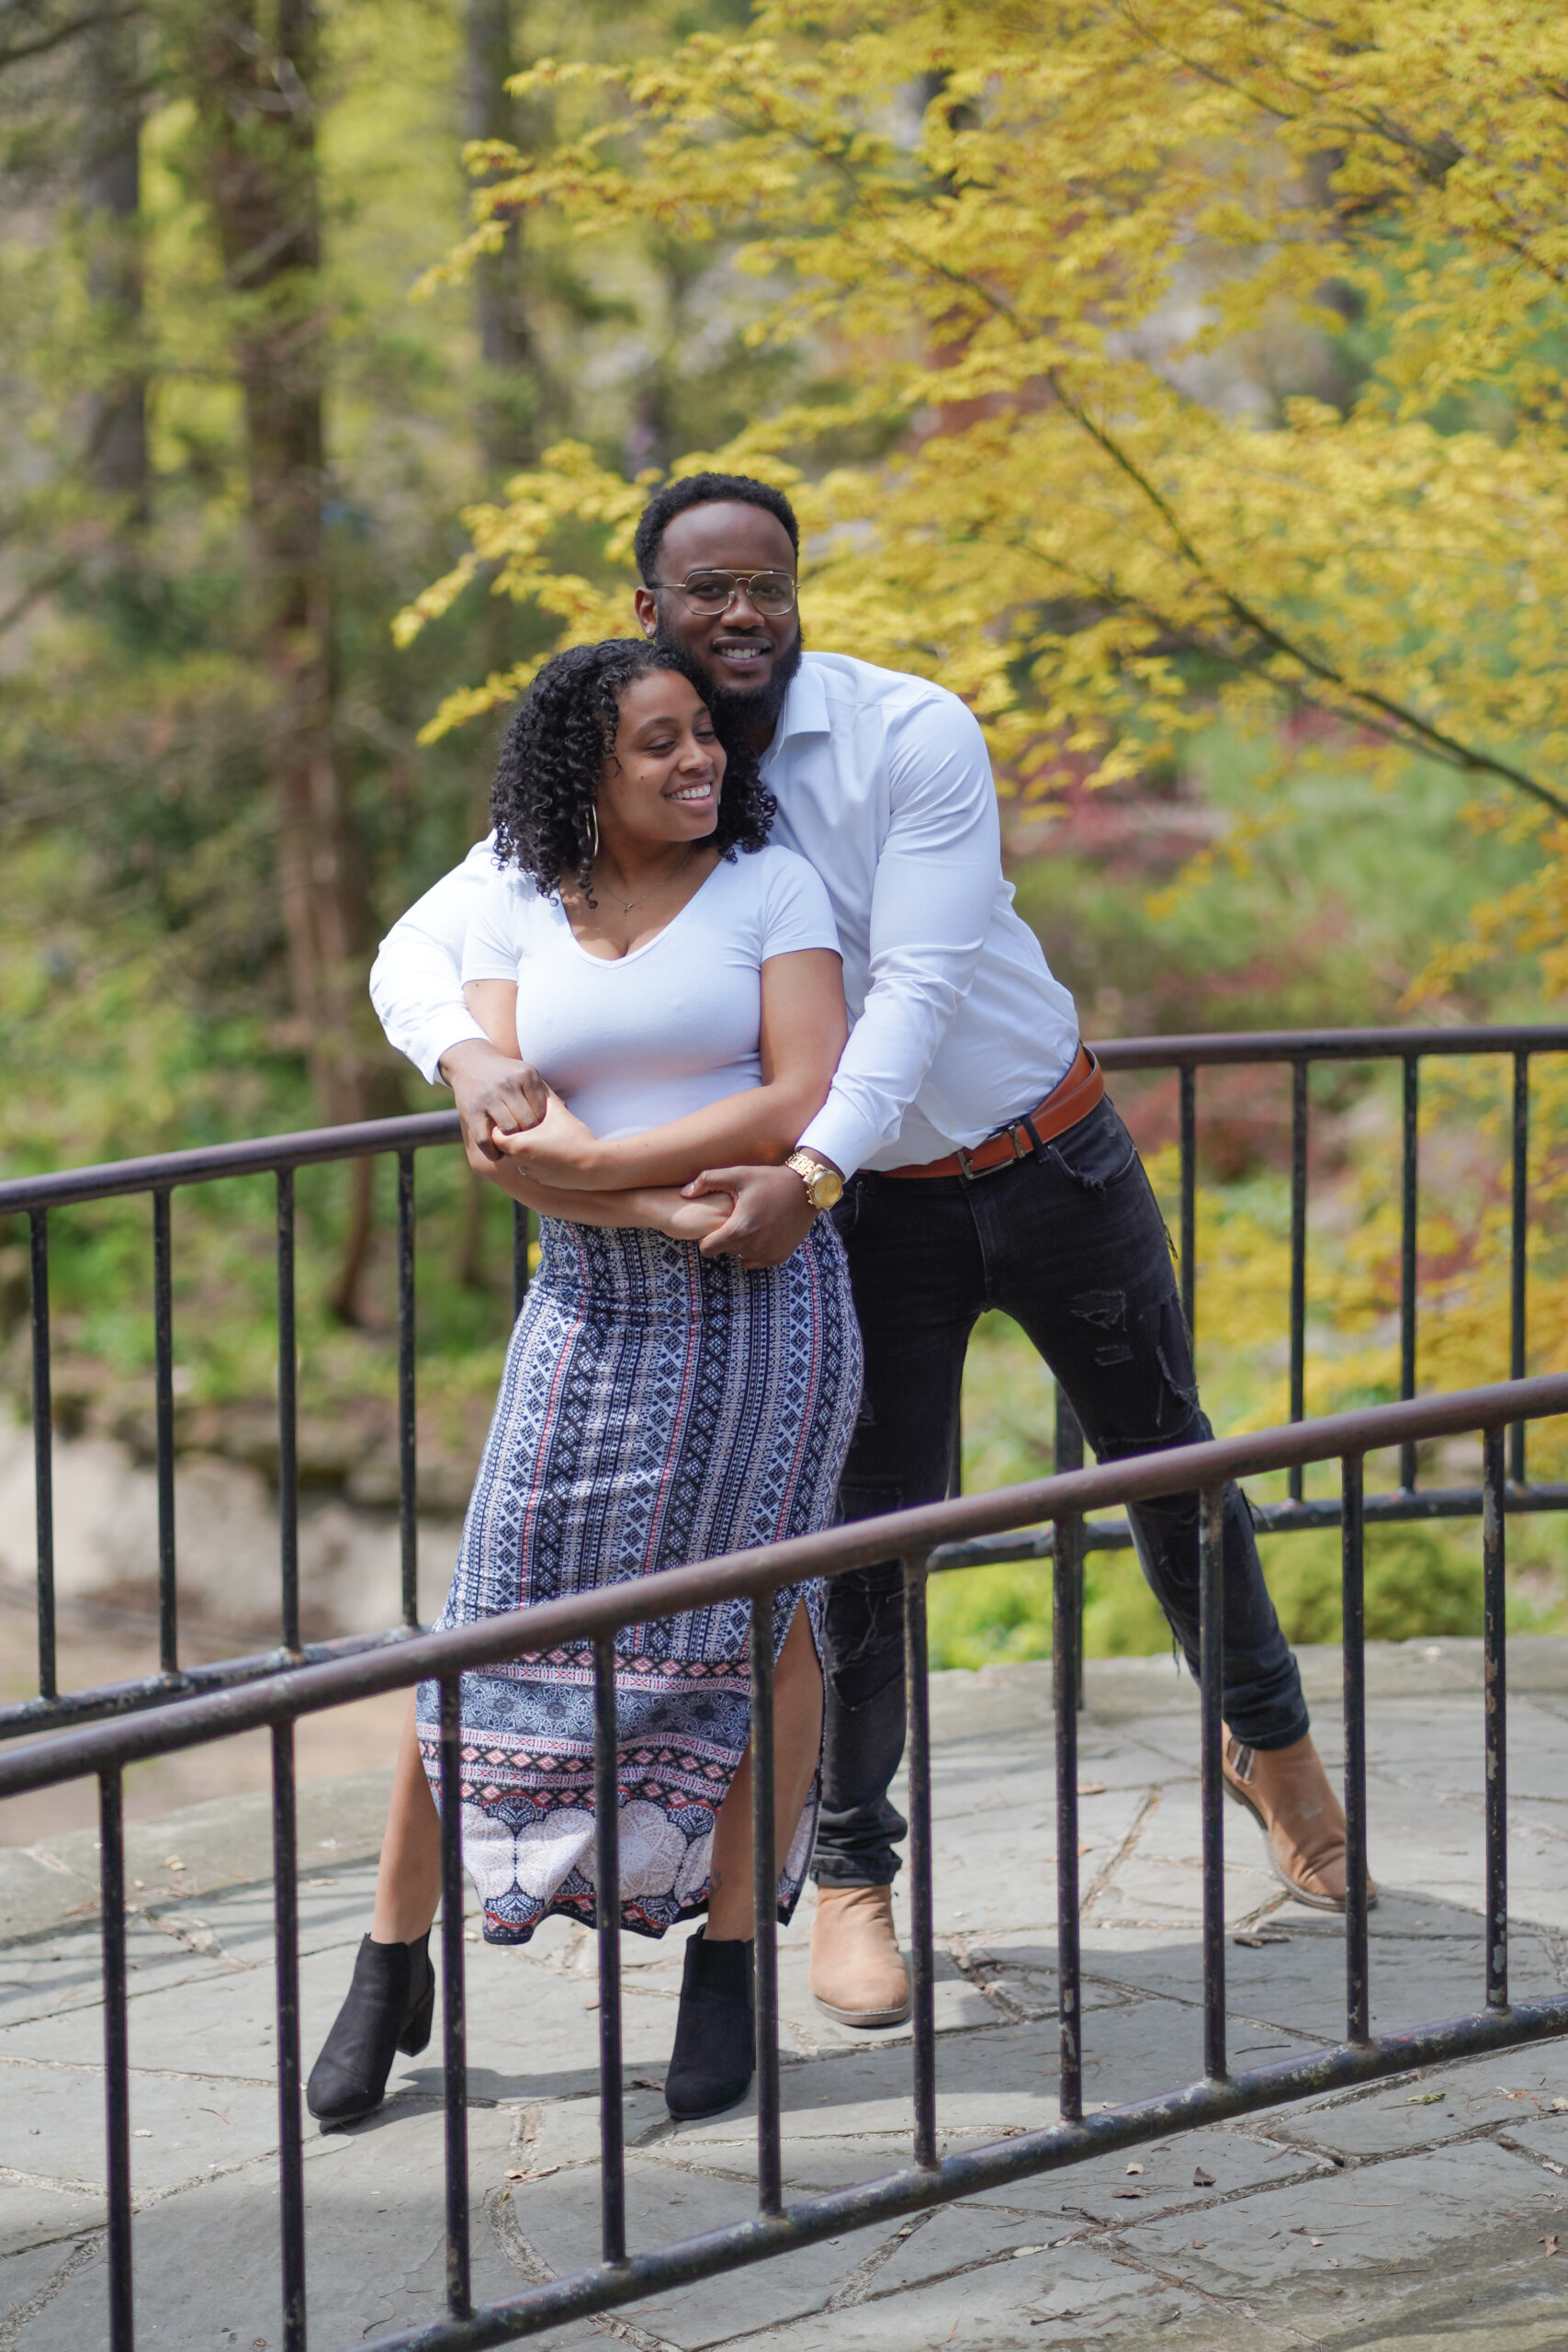 Tasha & Nate’s Couples Session at High Park in Downtown Toronto